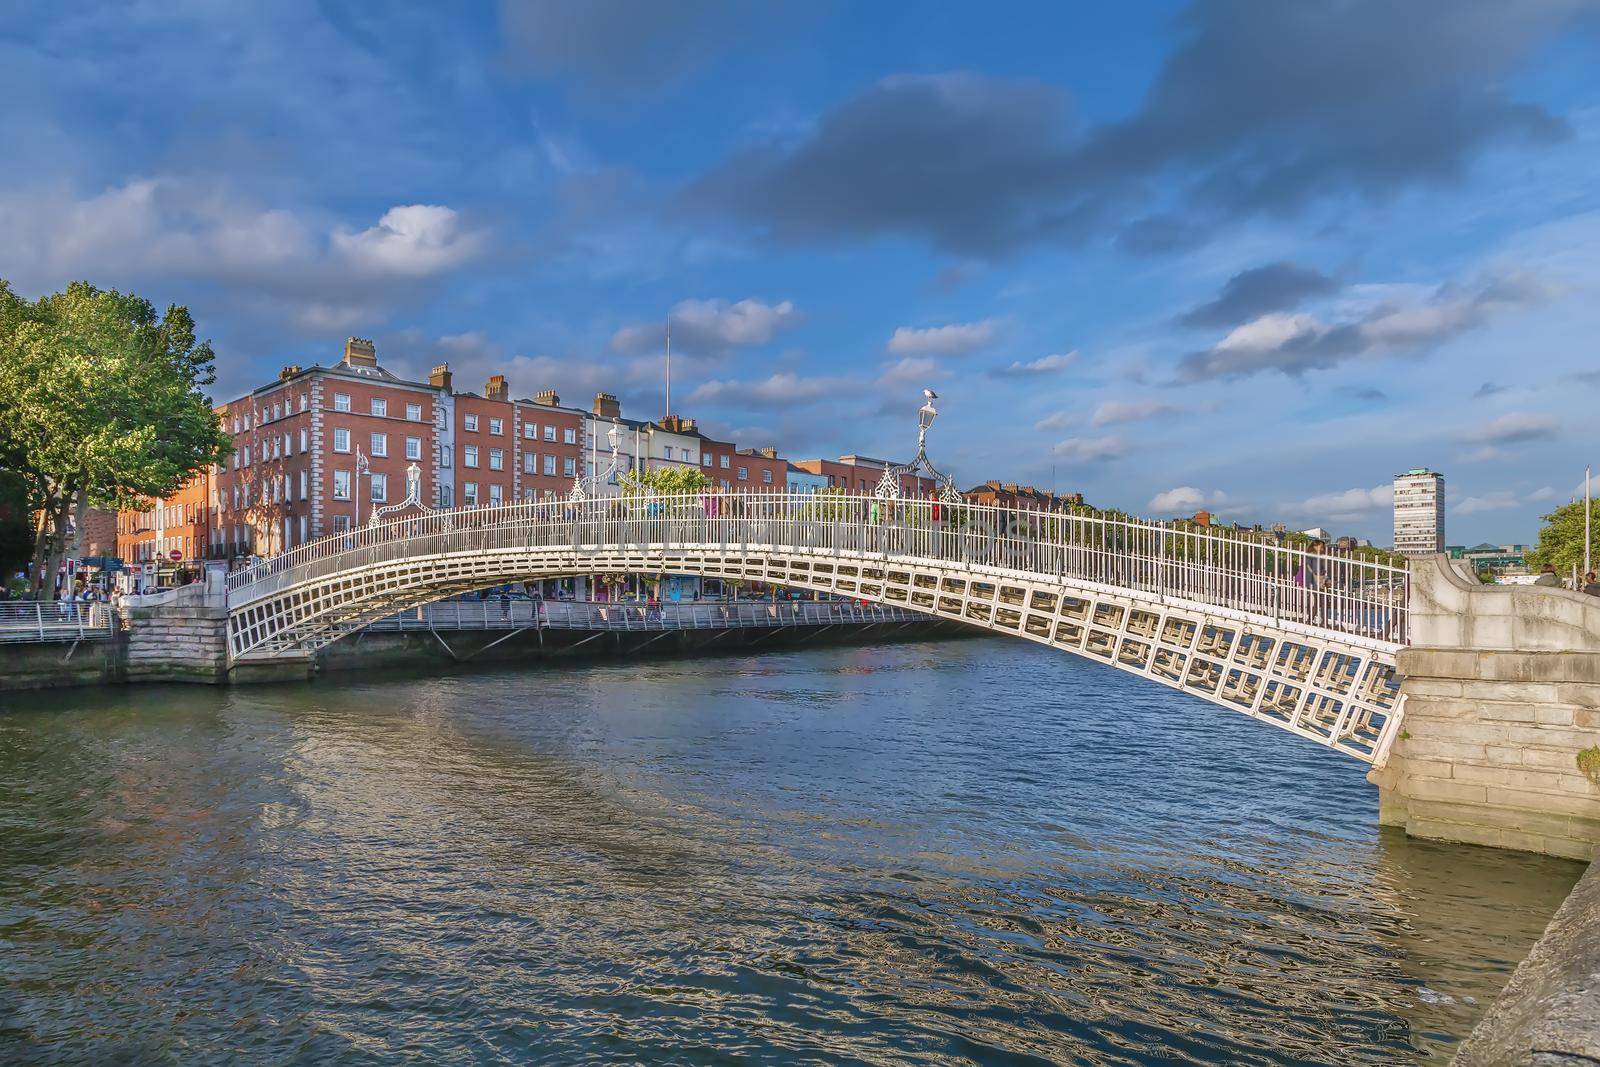 Ha'penny Bridge and officially the Liffey Bridge, is a pedestrian bridge built in May 1816 over the River Liffey in Dublin, Ireland